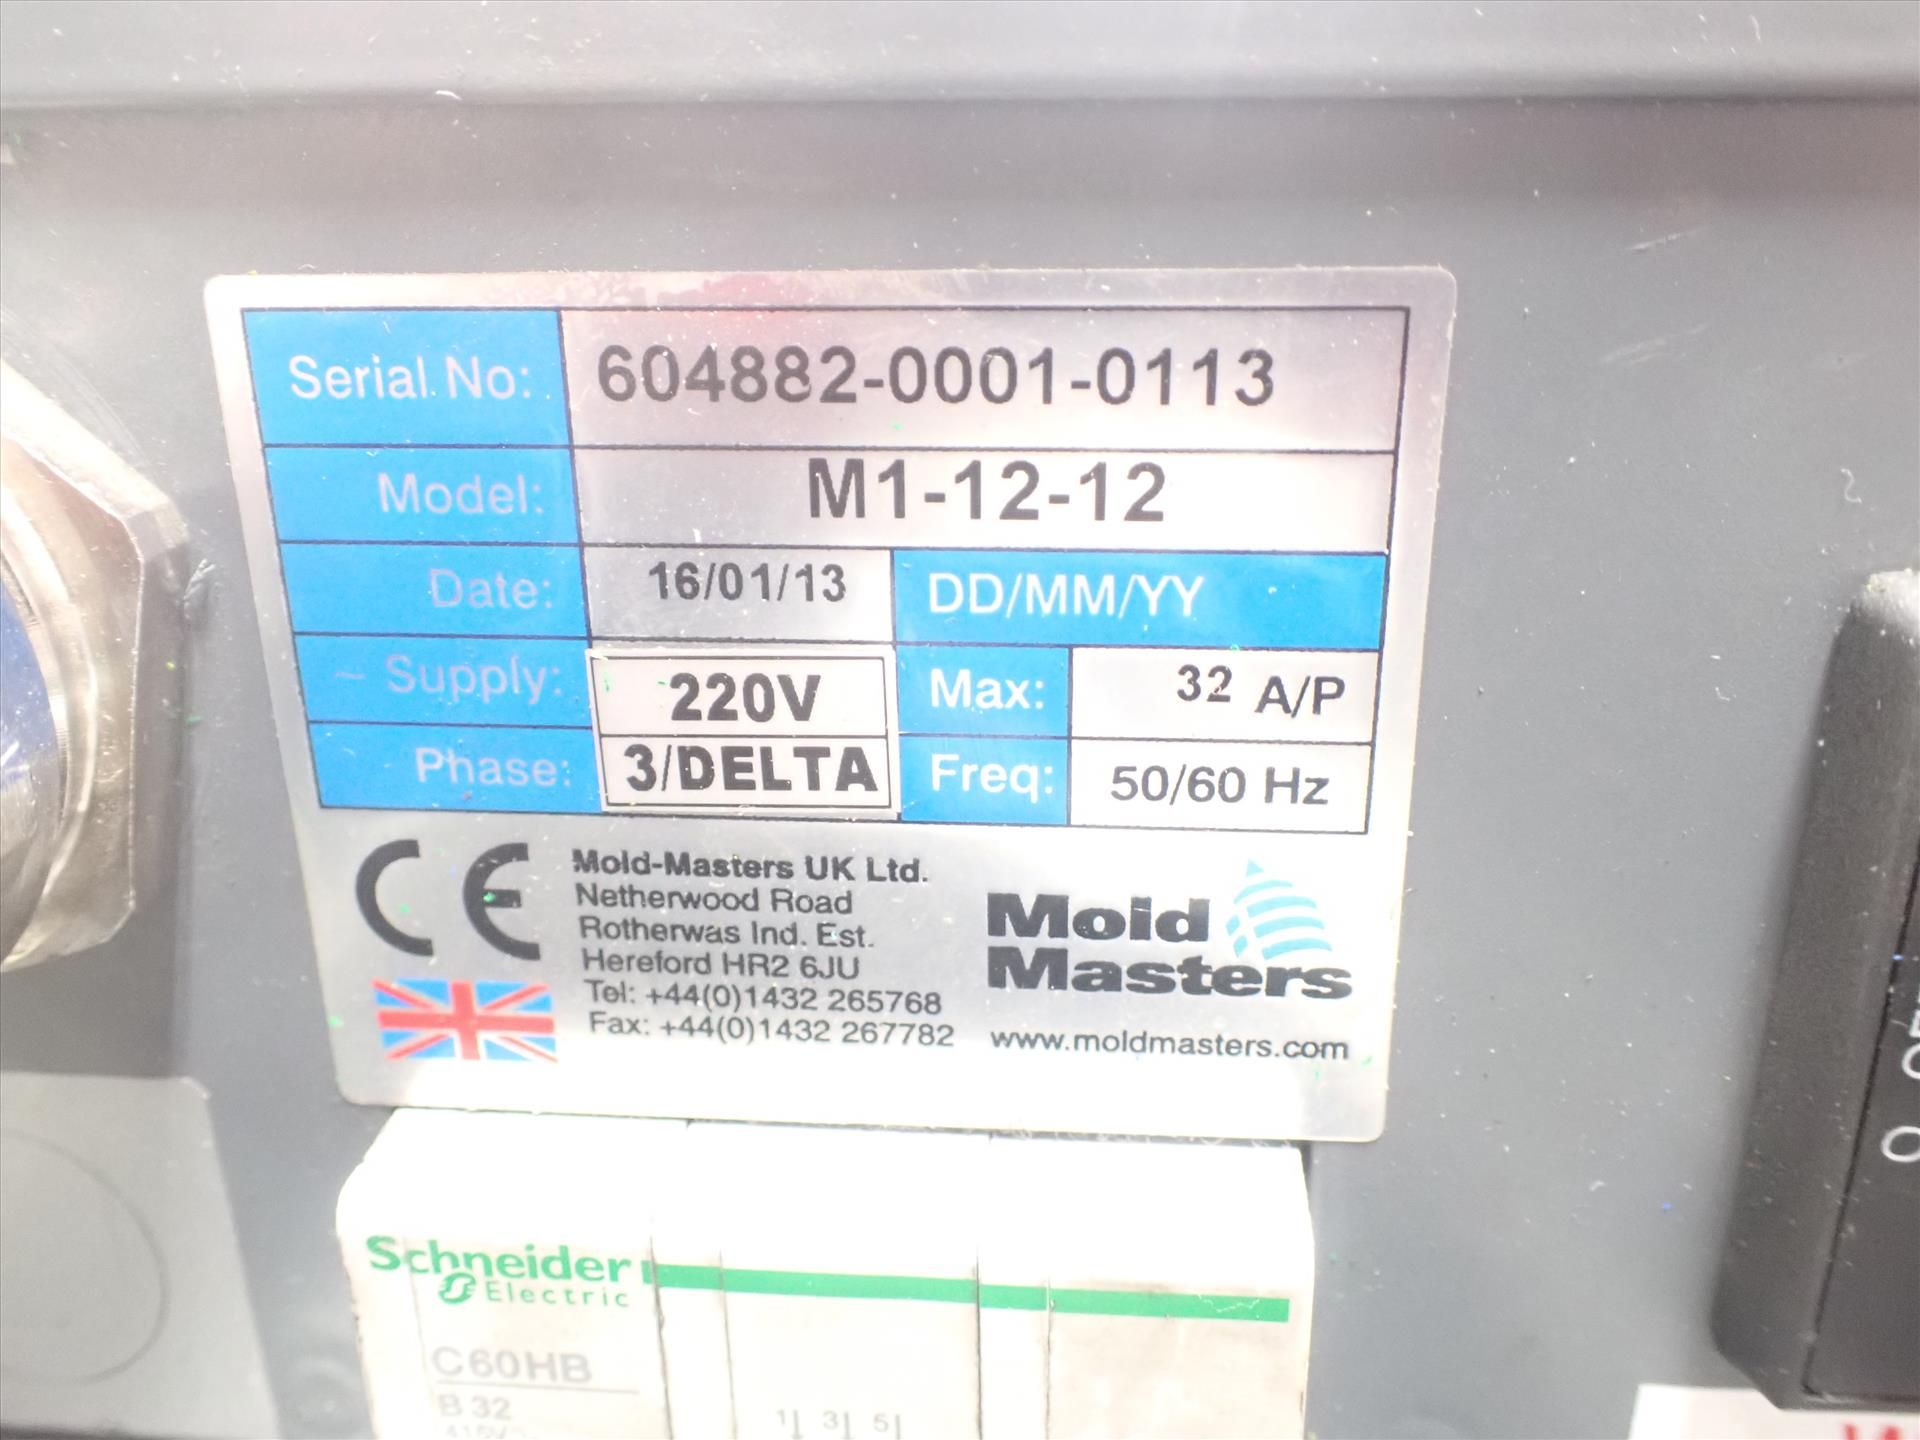 Mold-Master temperature controller, mod. M1-12-12, ser. no. 604882-0001-0113, 44-zone w/ touch- - Image 2 of 2